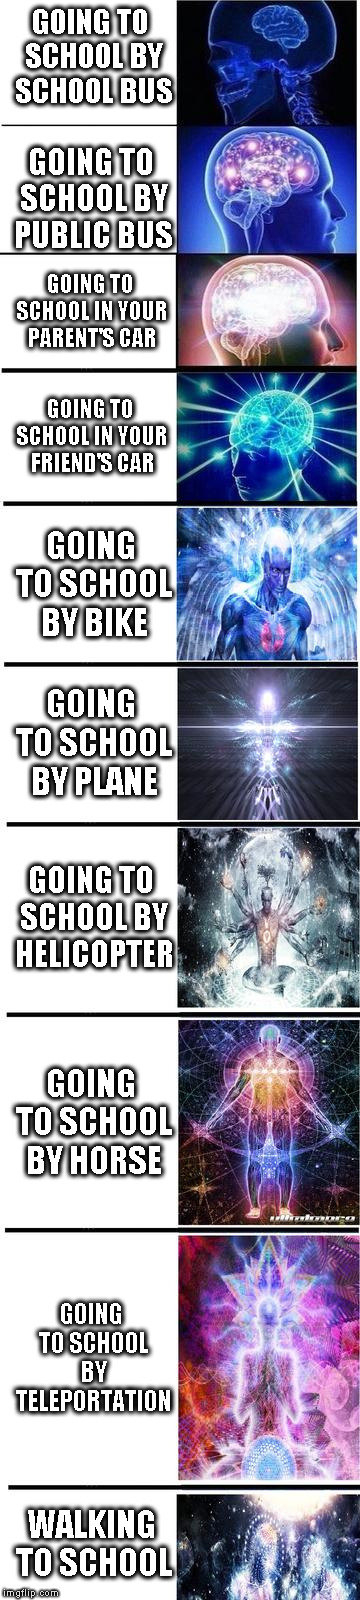 expanding brain | GOING TO SCHOOL BY SCHOOL BUS; GOING TO SCHOOL BY PUBLIC BUS; GOING TO SCHOOL IN YOUR PARENT'S CAR; GOING TO SCHOOL IN YOUR FRIEND'S CAR; GOING TO SCHOOL BY BIKE; GOING TO SCHOOL BY PLANE; GOING TO SCHOOL BY HELICOPTER; GOING TO SCHOOL BY HORSE; GOING TO SCHOOL BY TELEPORTATION; WALKING TO SCHOOL | image tagged in expanding brain | made w/ Imgflip meme maker